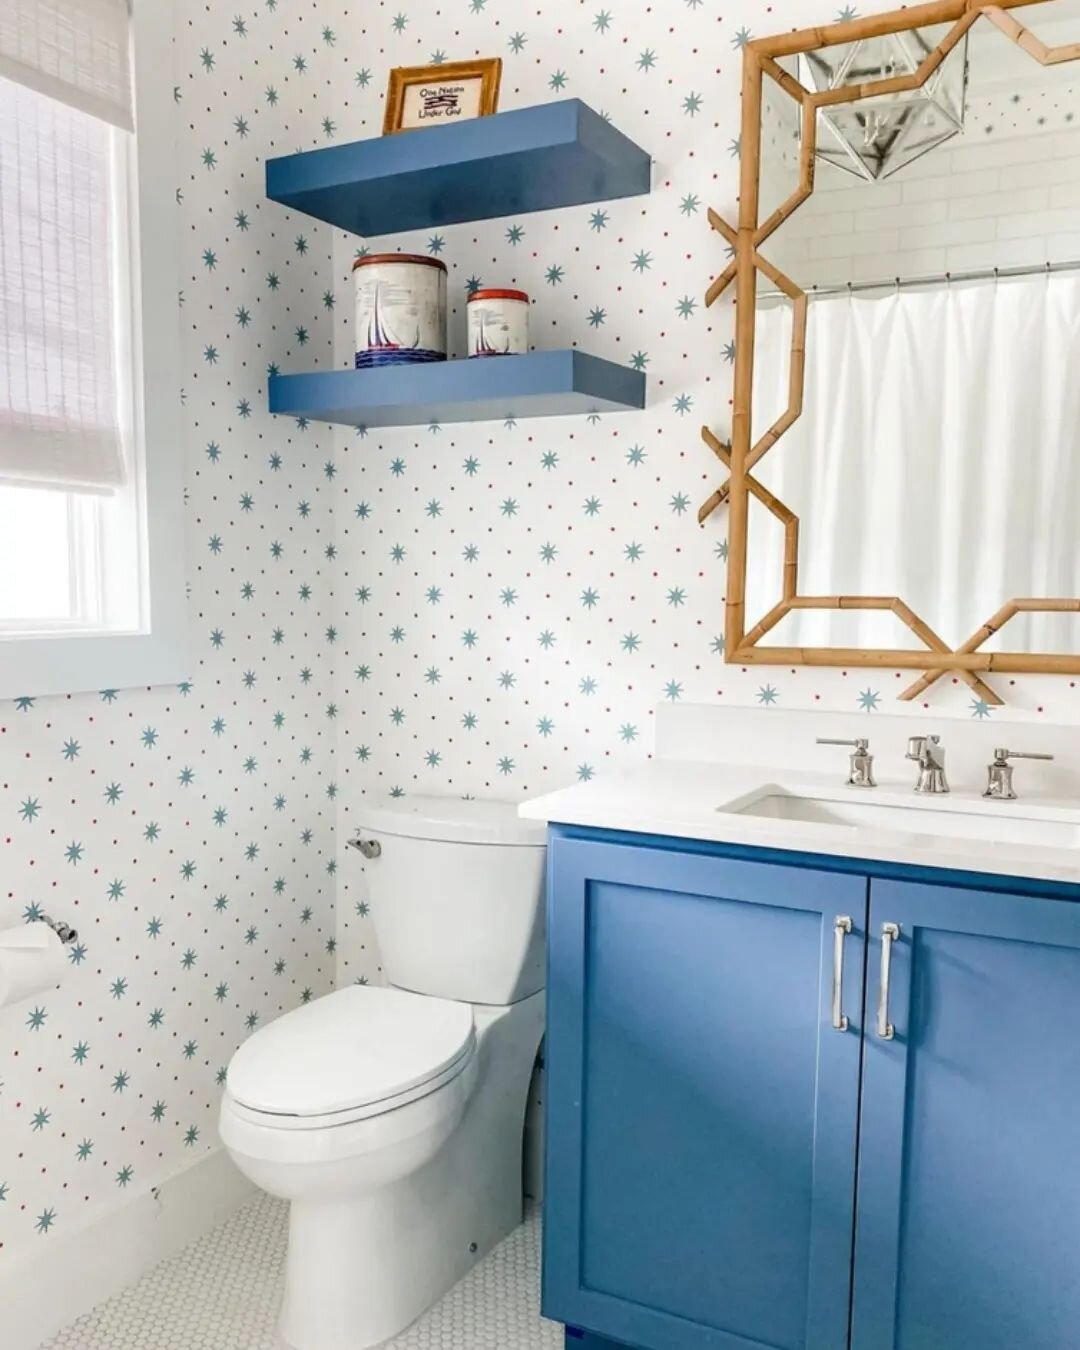 ❤️💙 It's Wallpaper Wednesday so let's take a second for this Beach House Bunk Bath we did with one of our Favorite clients. ⭐️

#bathroomwallpaper
#kidsbathroom #kidsbath #homesthatinspireloveandjoy #attentiontodetail #luxuryhomes #balsaminteriors #